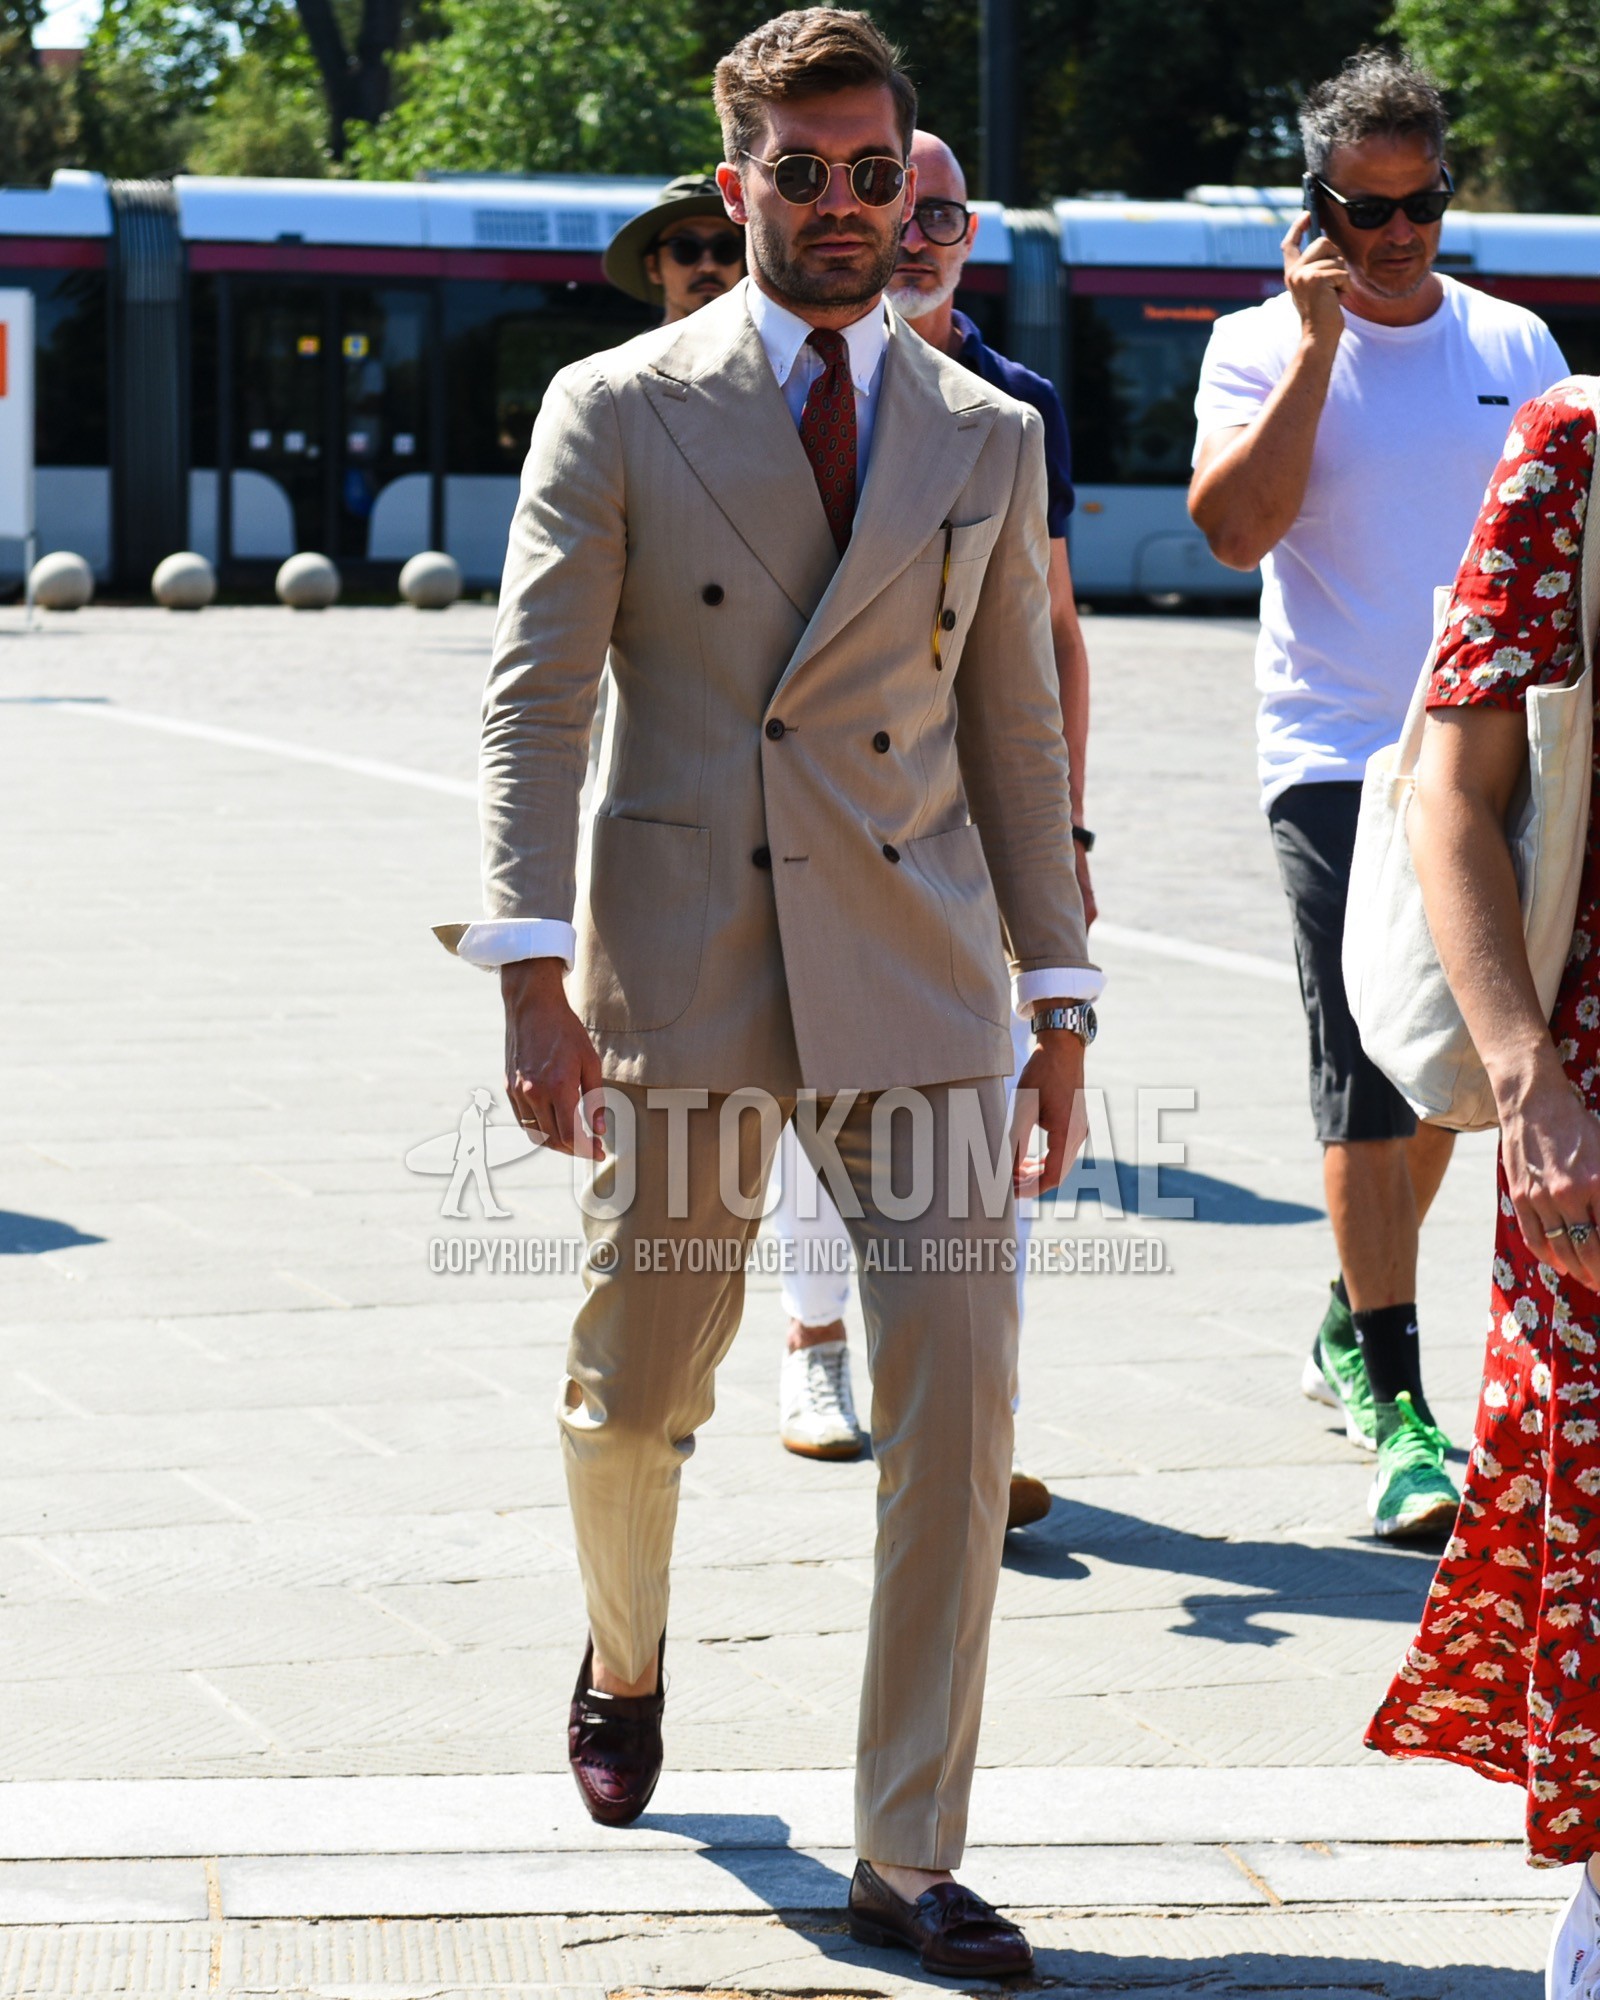 Men's spring summer outfit with gold plain sunglasses, white plain shirt, red tassel loafers leather shoes, beige stripes suit, red small crest necktie.